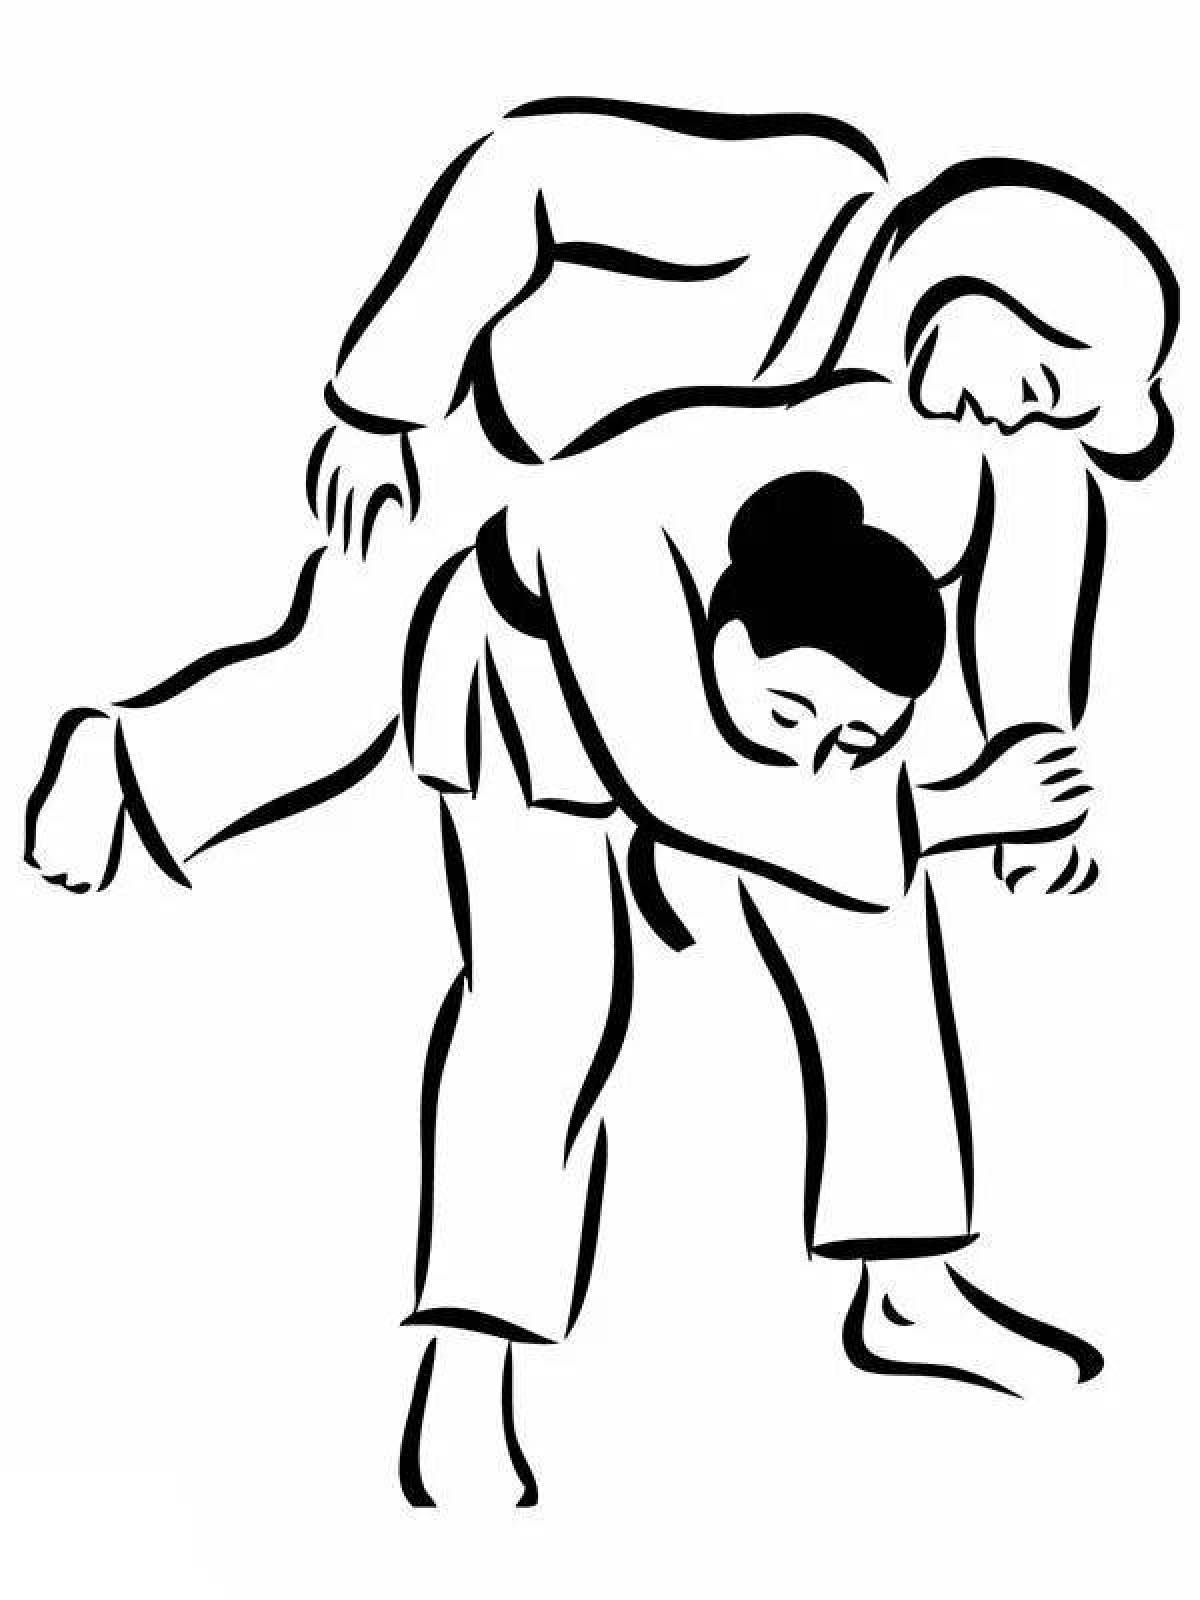 Animated judo coloring page